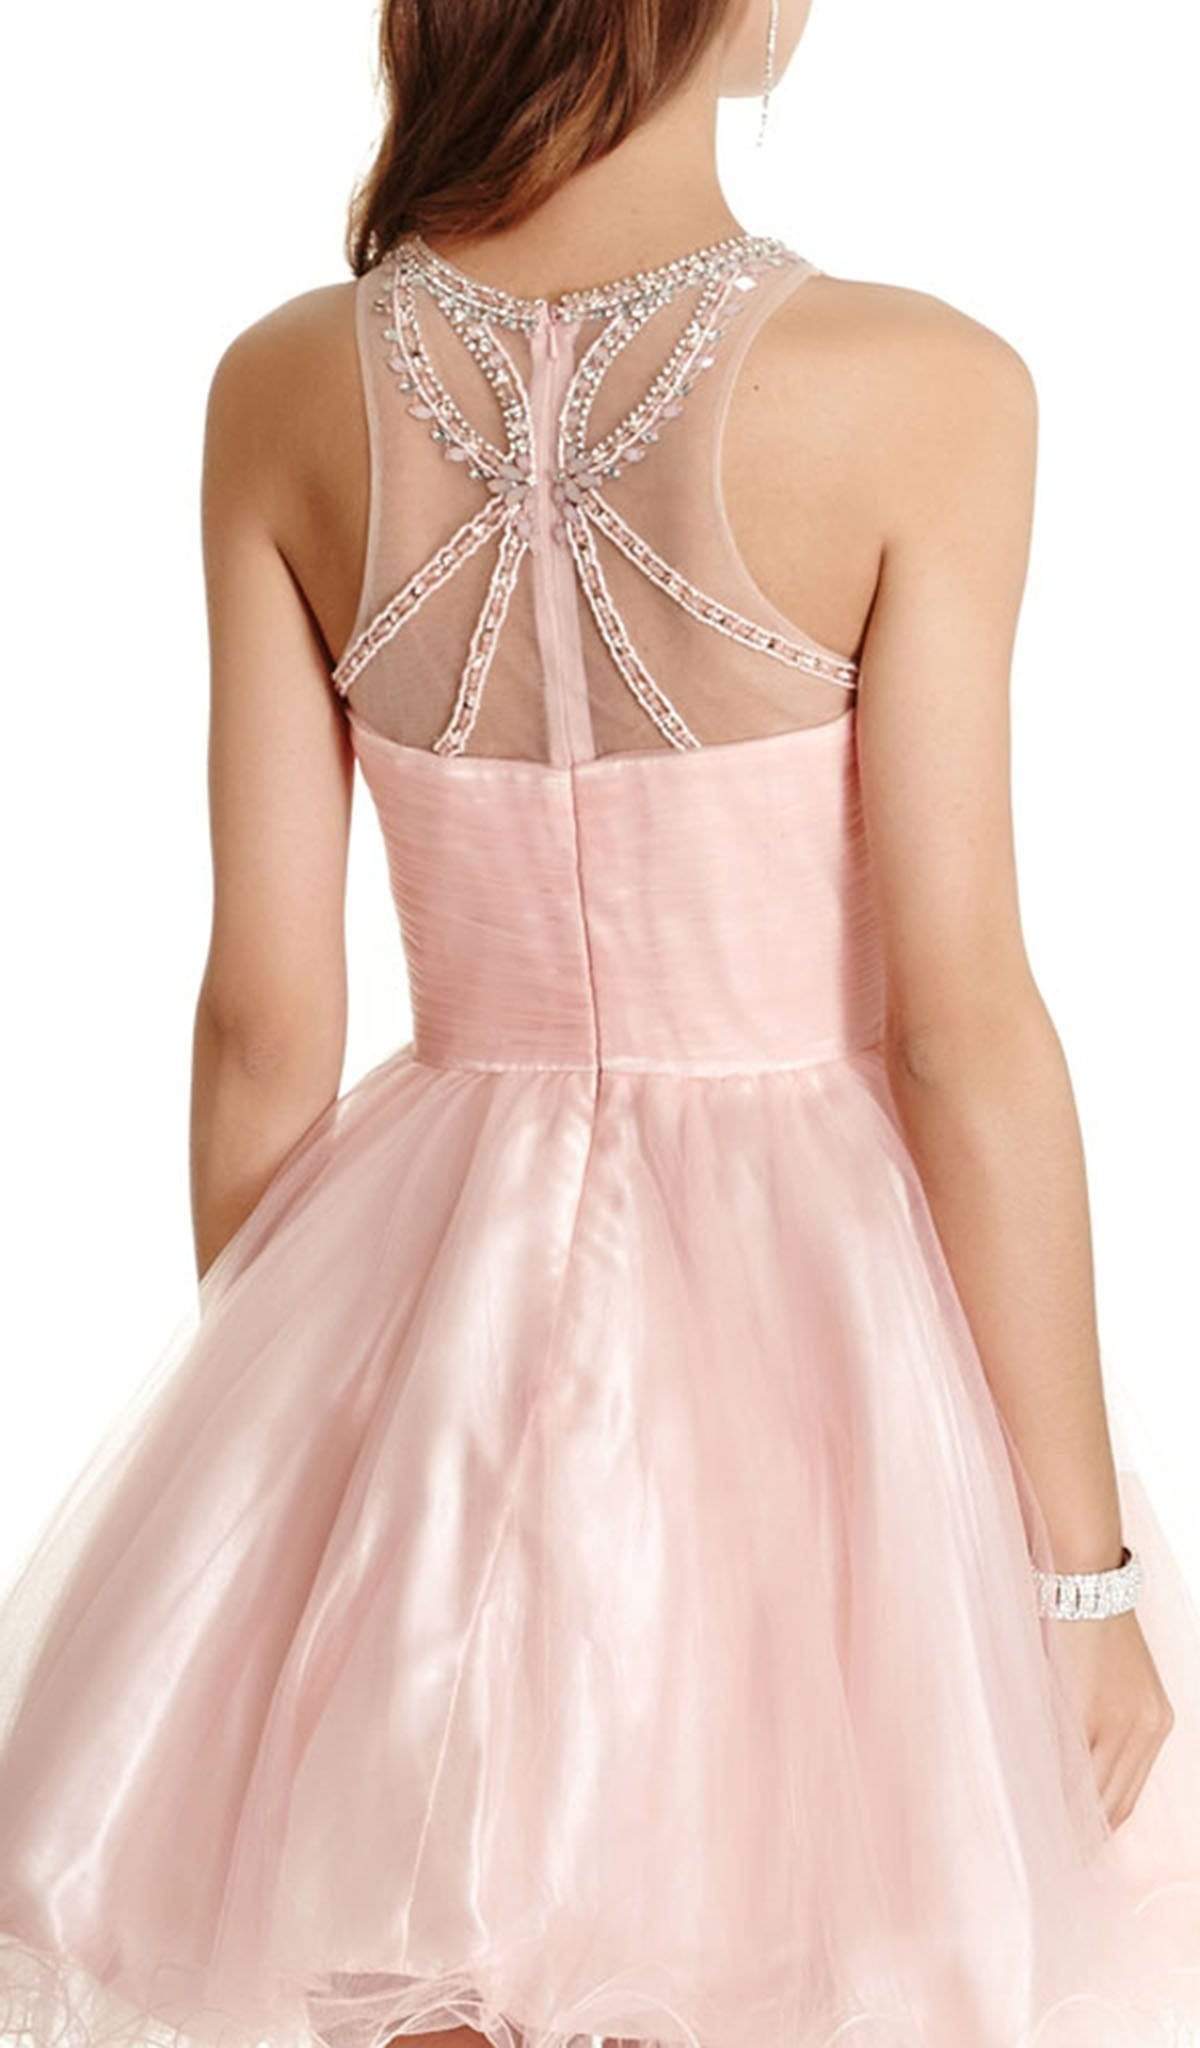 Dazzling Illusion Halter A-line Homecoming Dress Dress